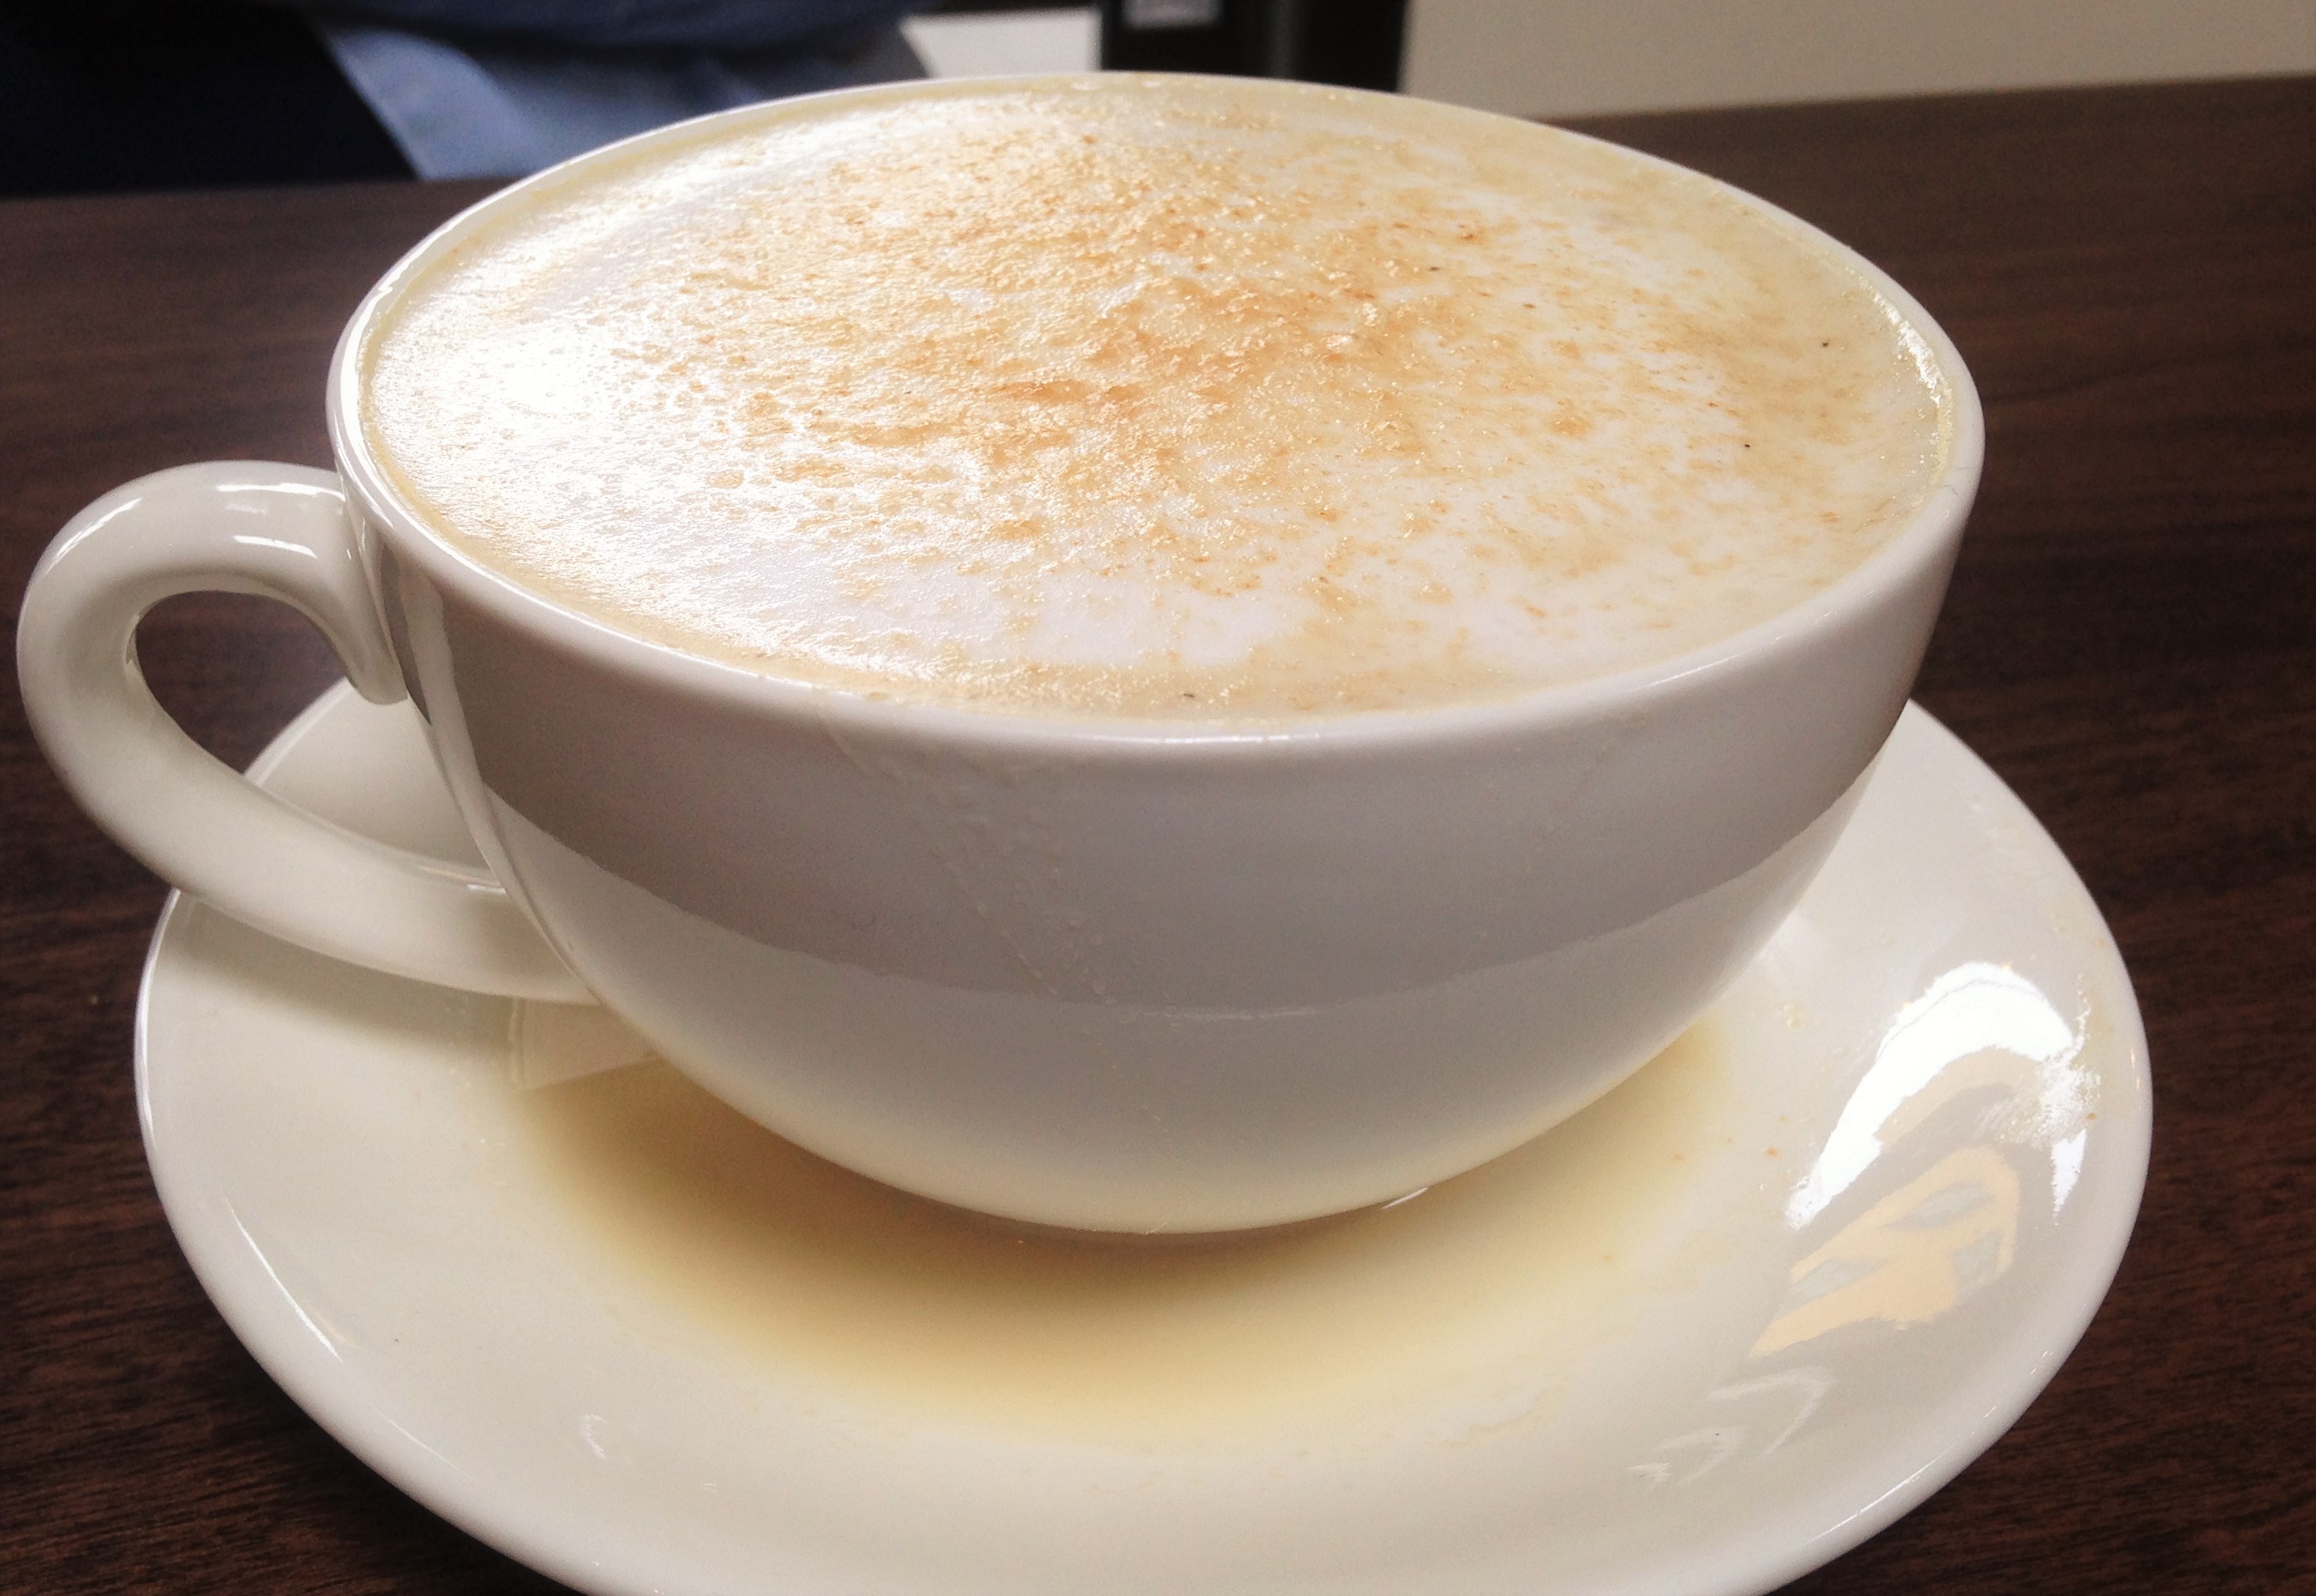 Darjeeling-Caramel Tea Latte at Steven Smith Teamakers, photo by Carrie Uffindell